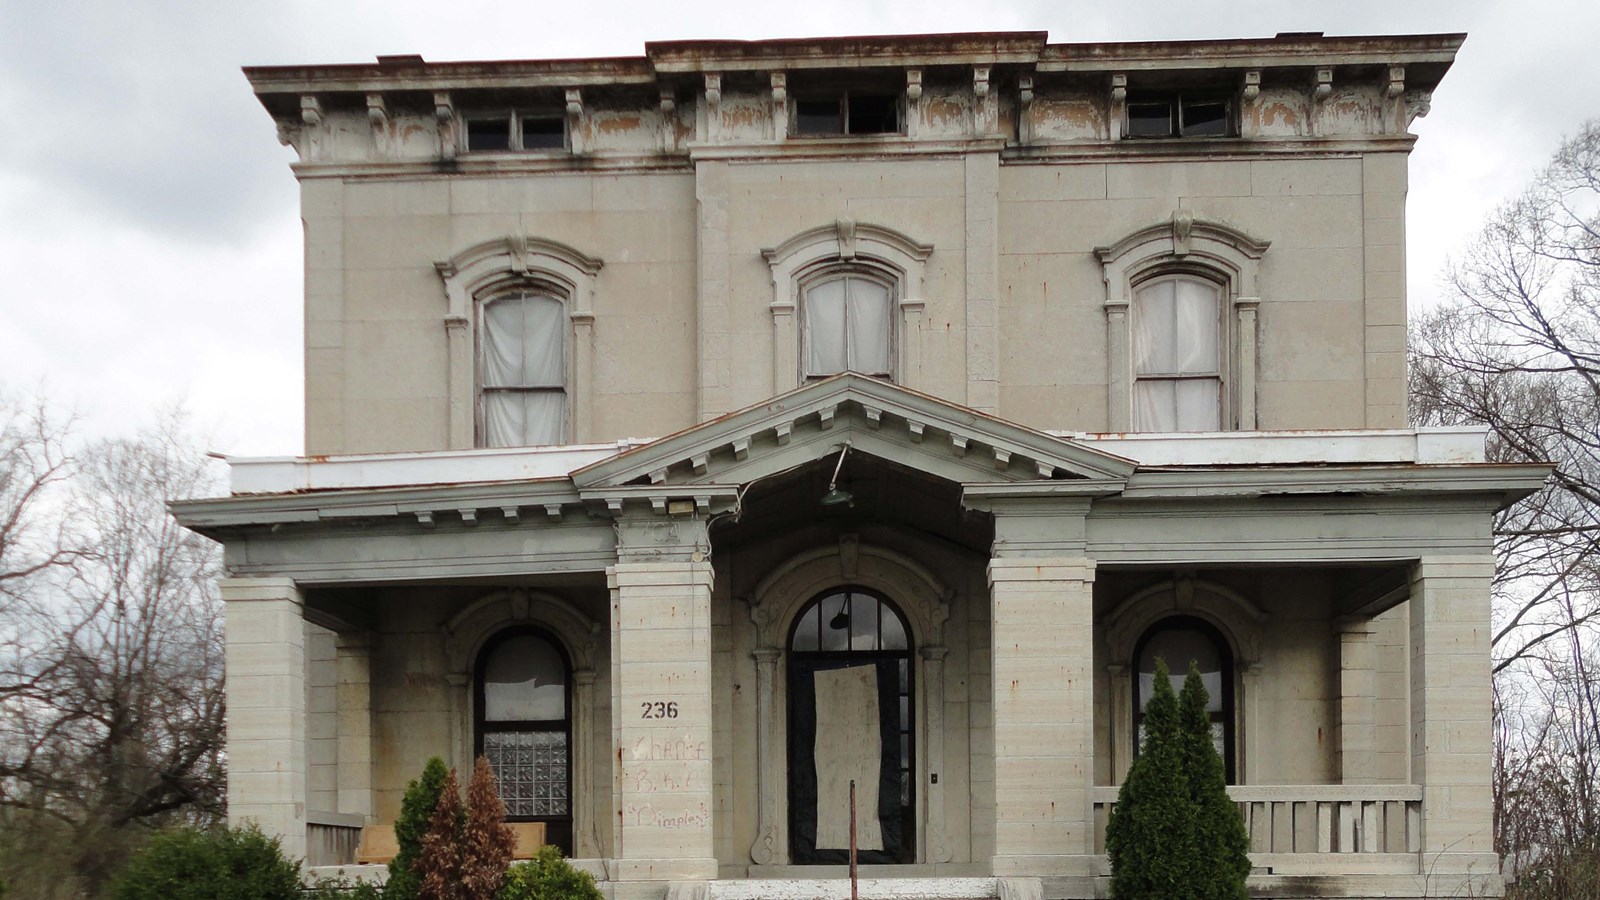 Three story residence built in Italianate tuscan Villa dn Renaissance Revival architectural style. 